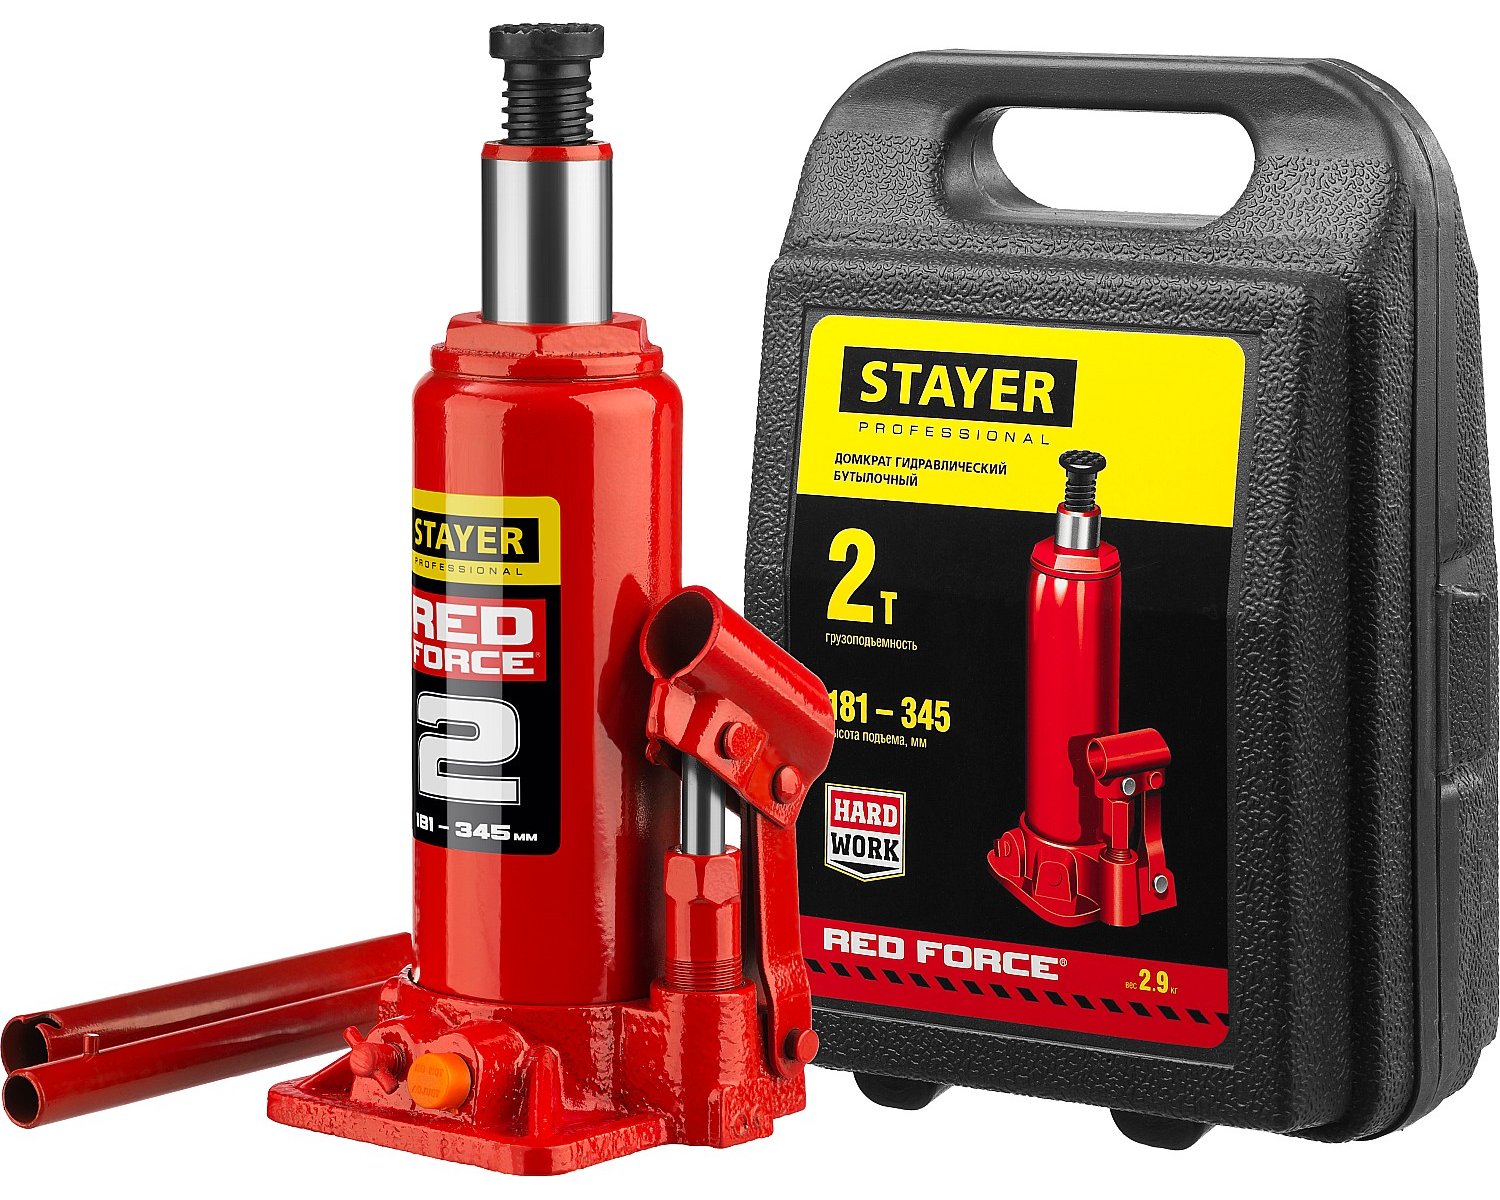      STAYER RED FORCE 2 181-345  43160-2- (43160-2-K_z01)